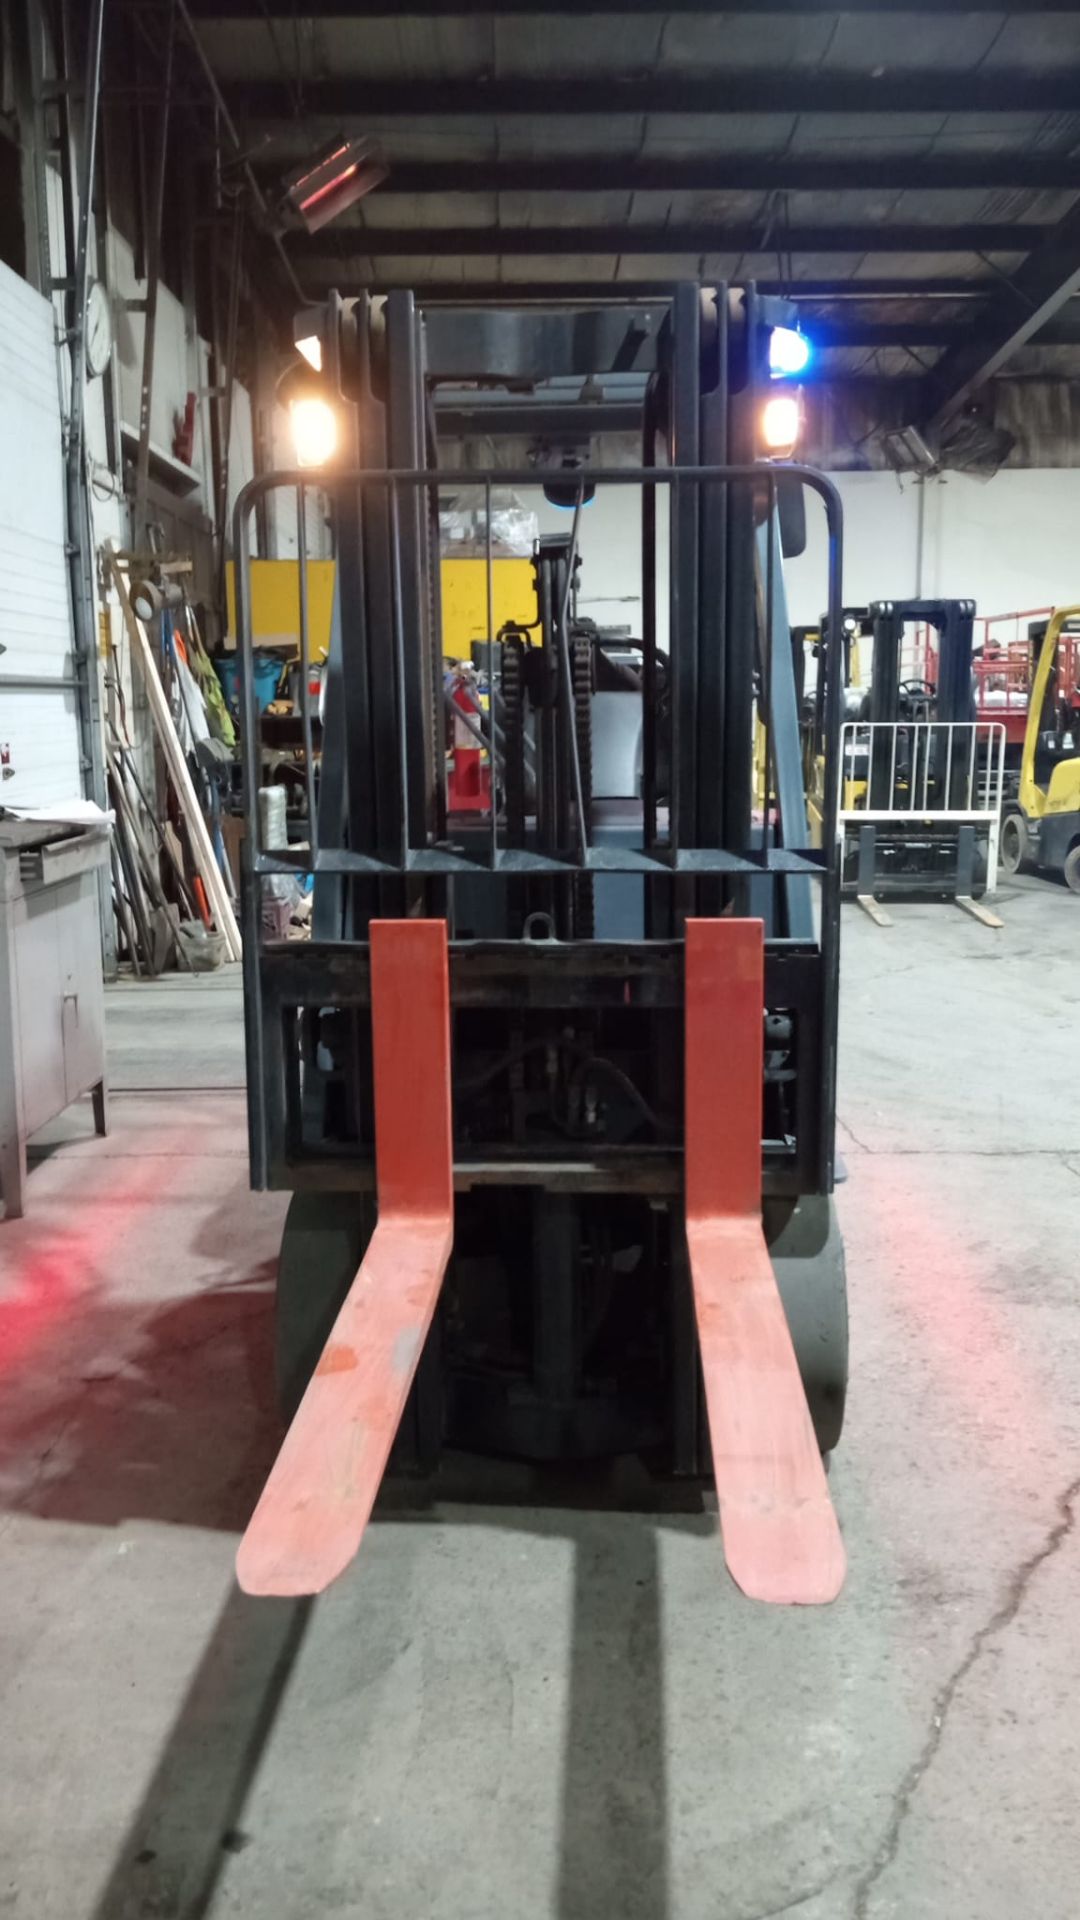 2014 TOYOTA 5,000lbs Capacity Electric Forklift 36V with sideshift & 3-Stage Mast - FREE CUSTOMS - Image 6 of 6